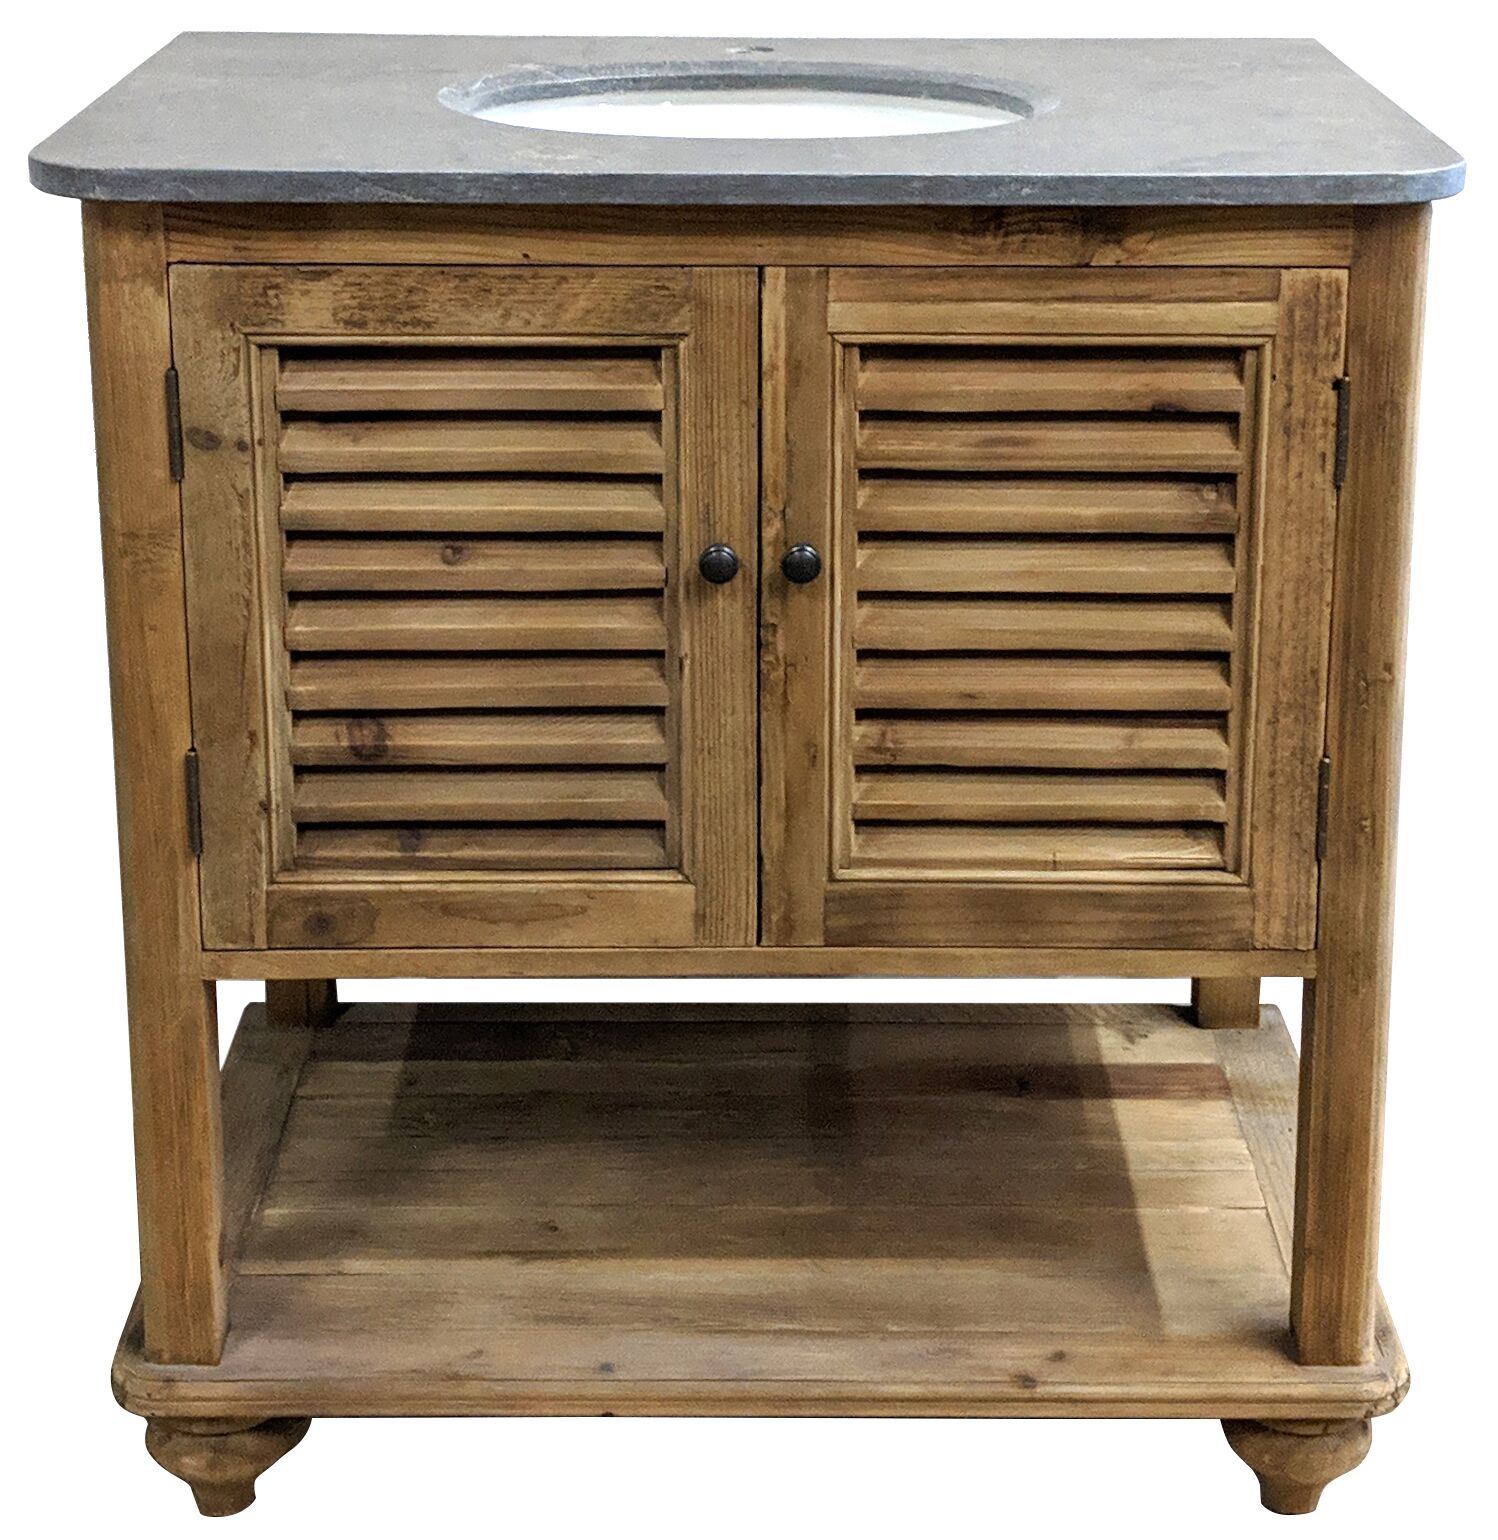 34" Handcrafted Reclaimed Pine Solid Wood Single Pothead Vanity Natural Pine Finish